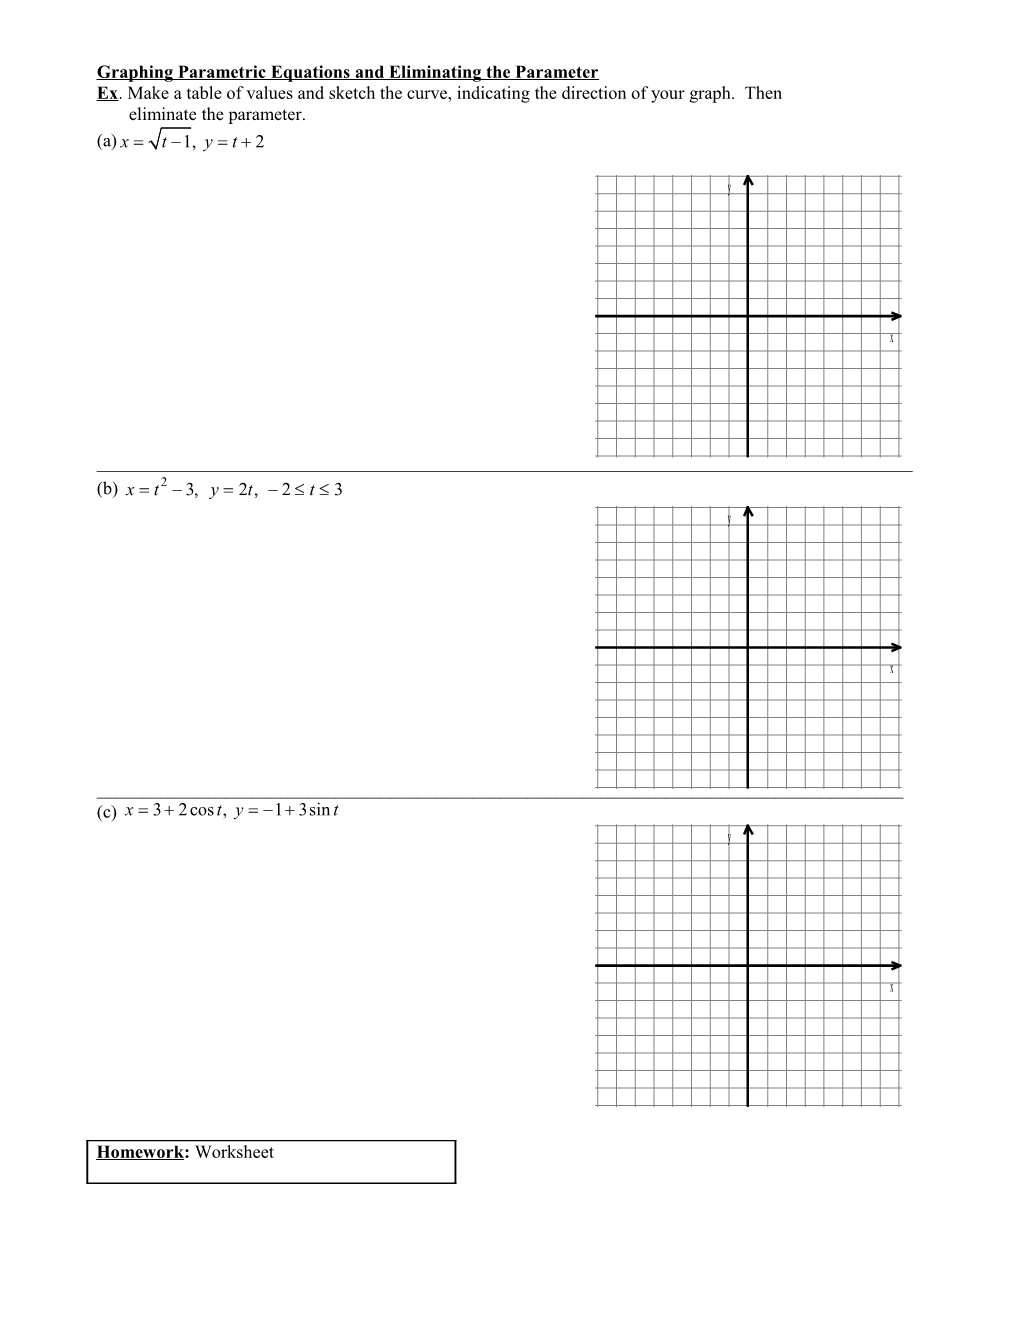 Graphing Parametric Equations and Eliminating the Parameter